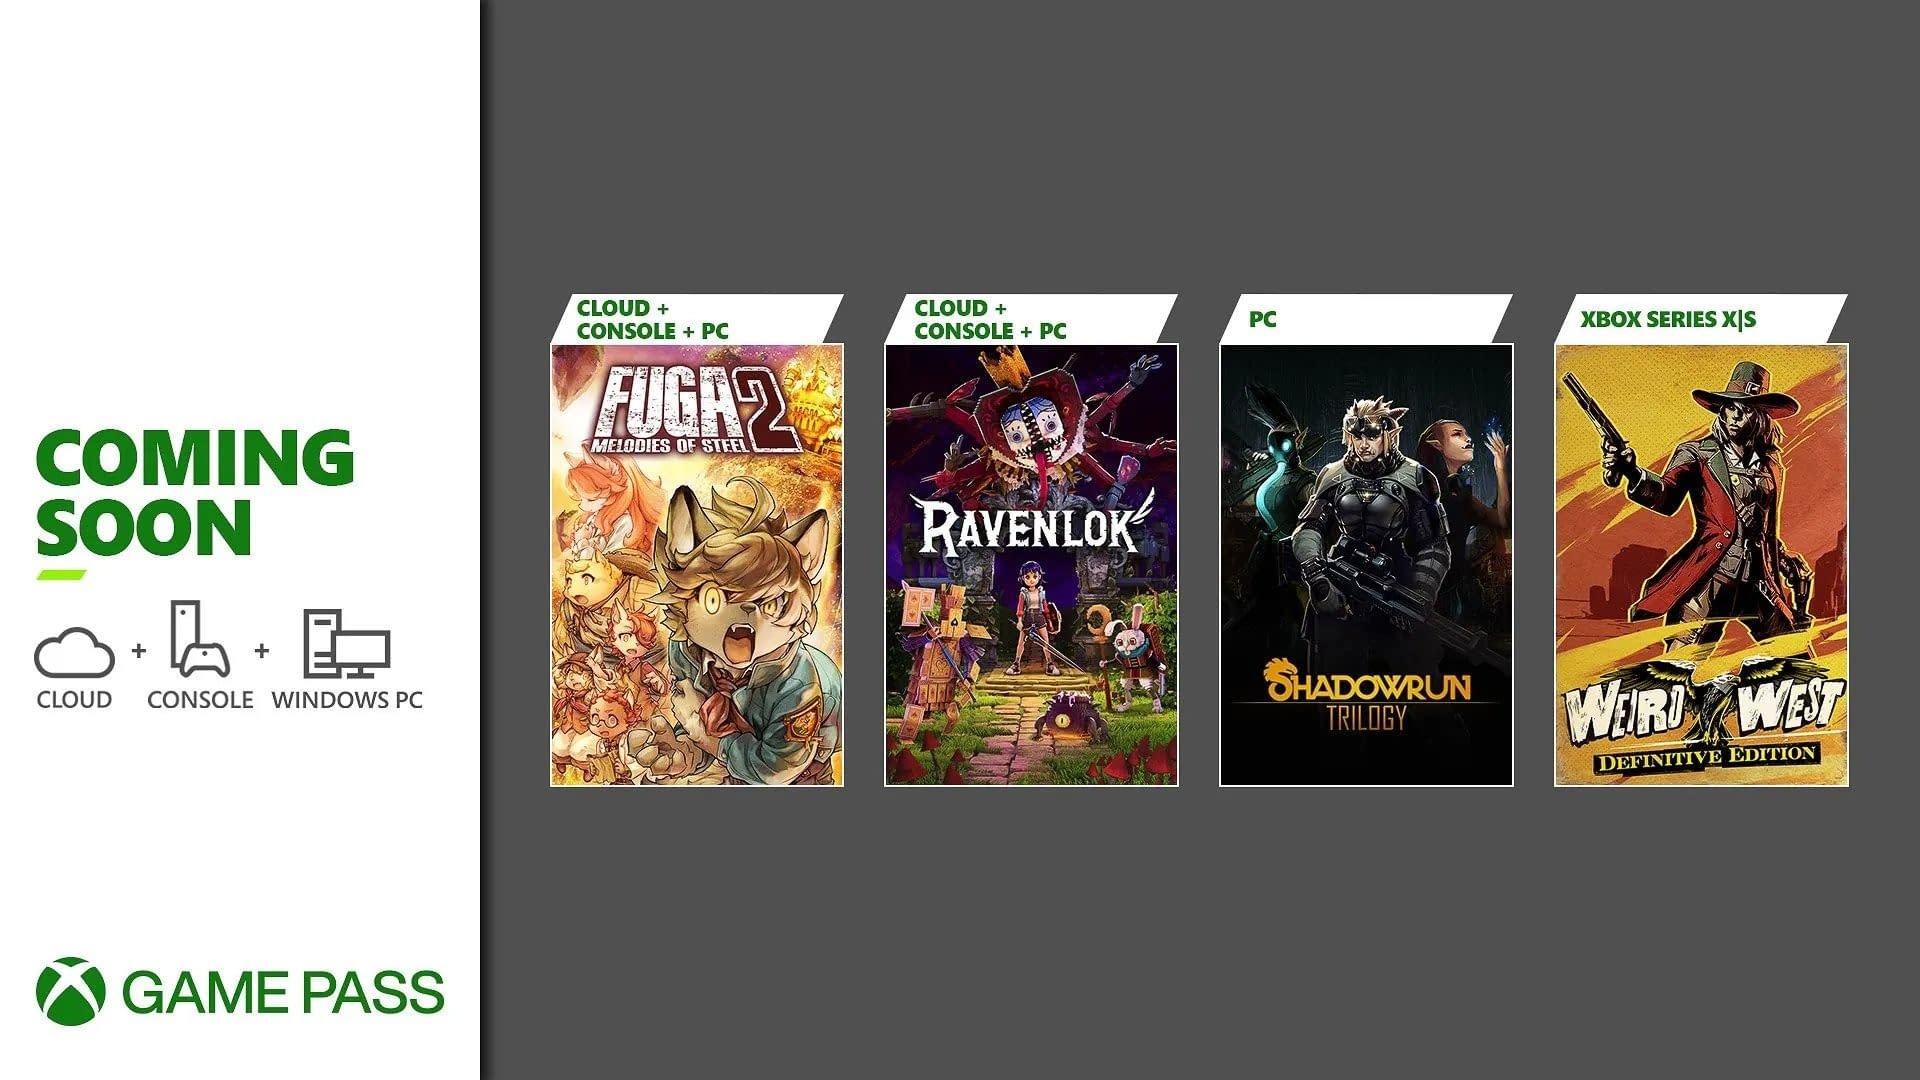 Xbox Game Pass announced upcoming games before May